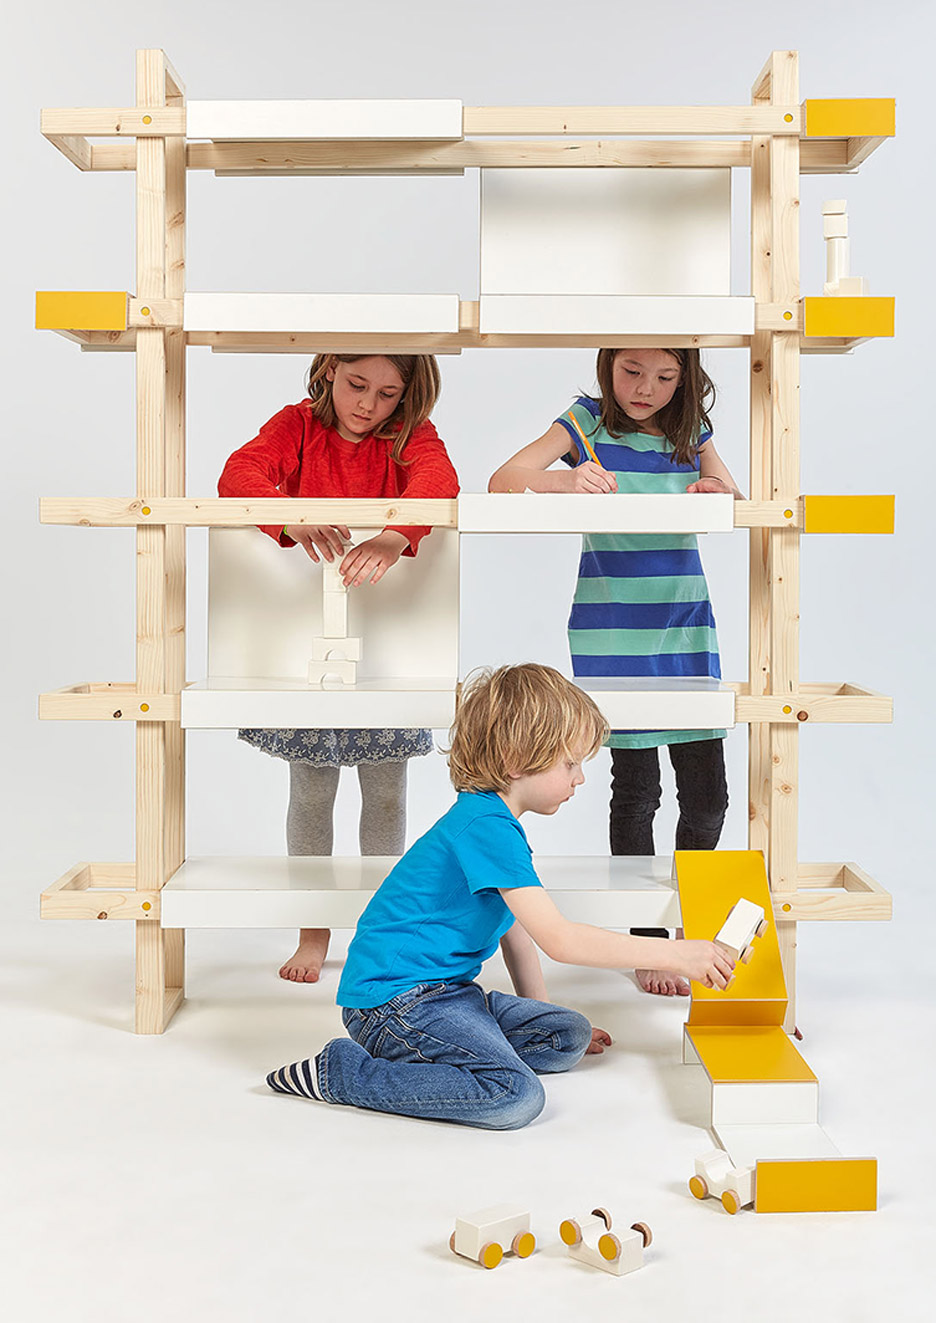 Press Play children's furniture by Burg University of Art and Design